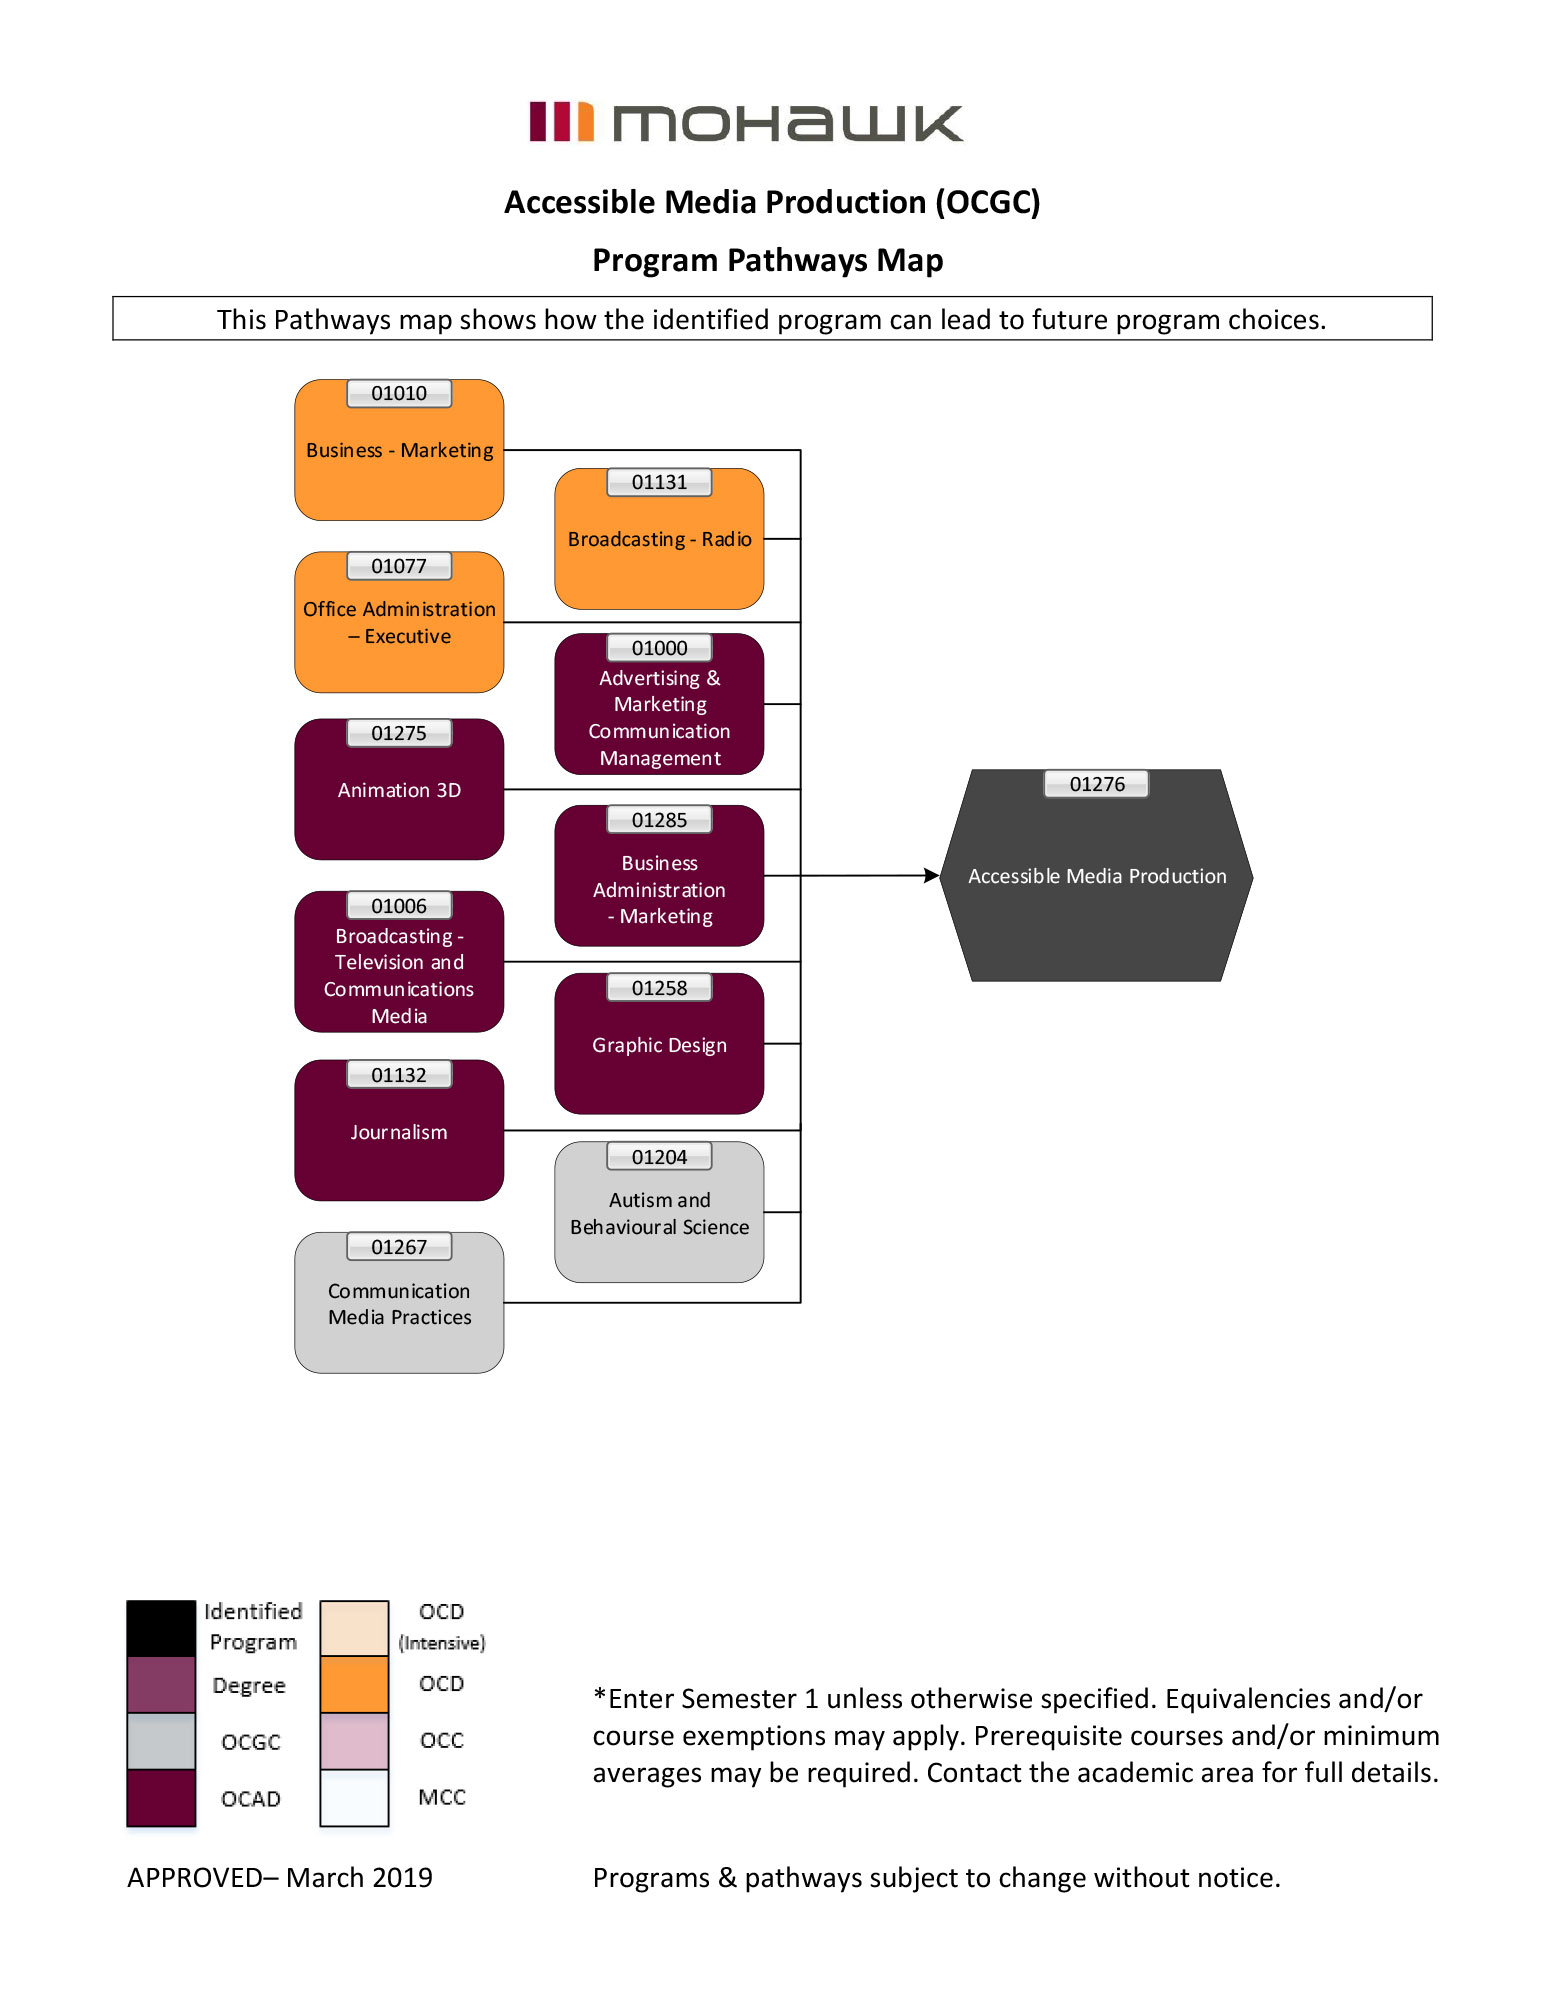 Accessible Media Production pathways map